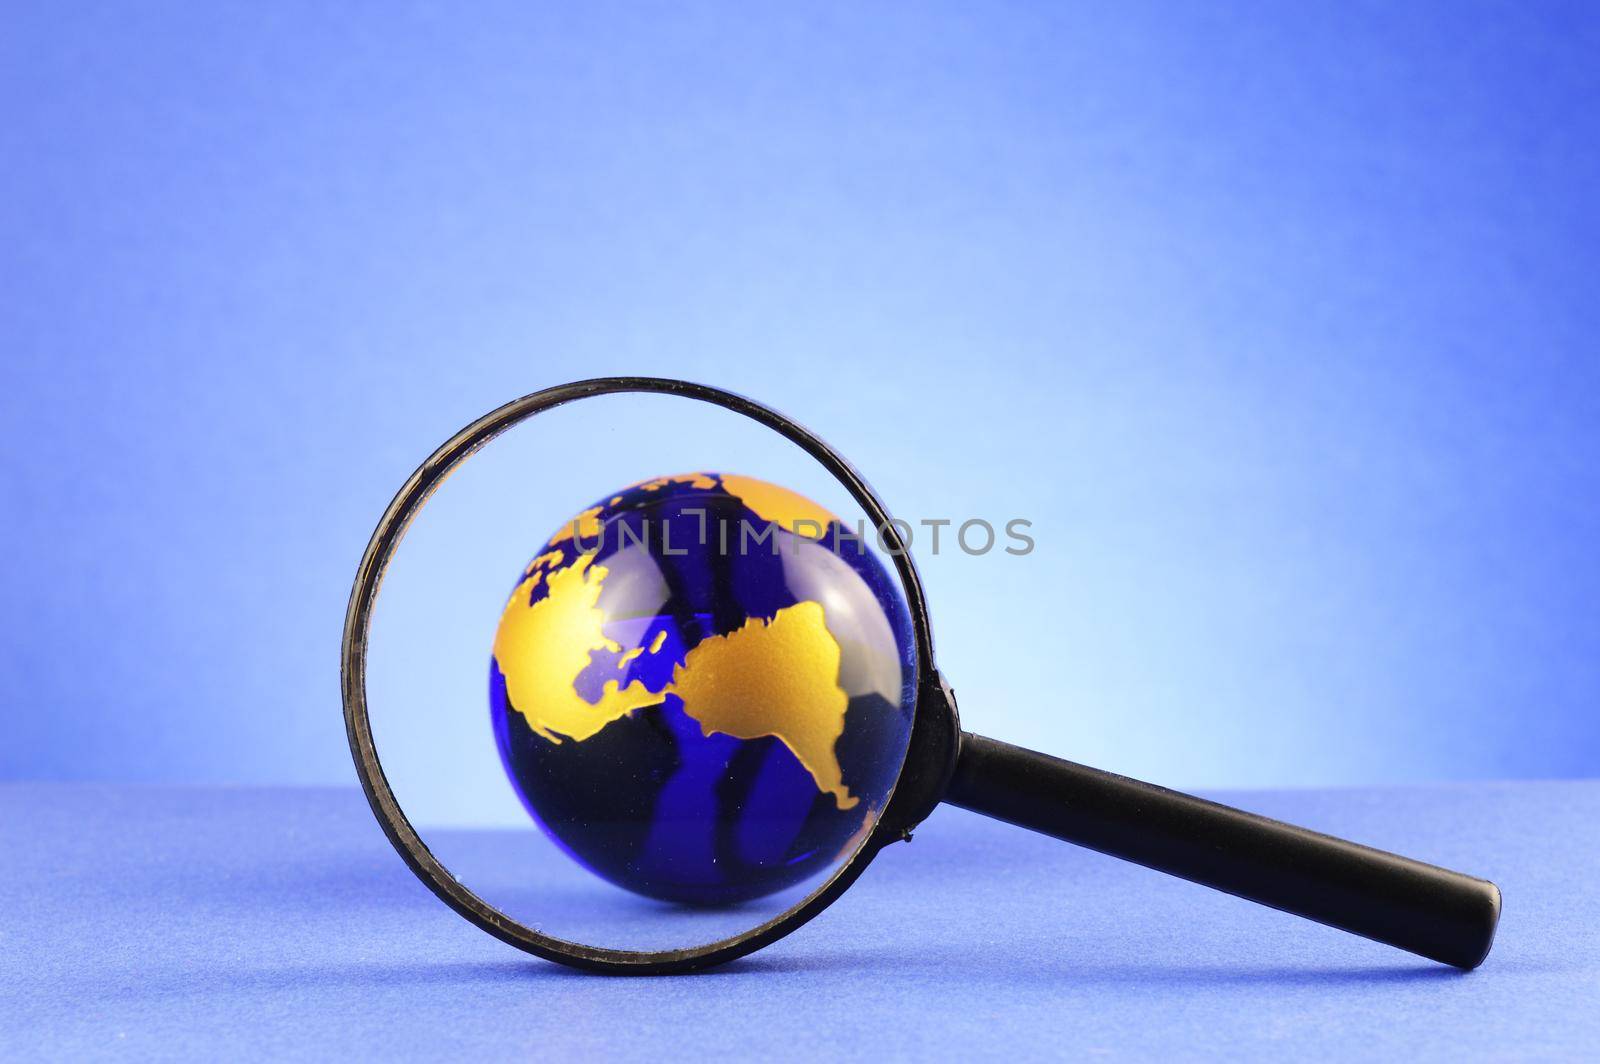 A magnify glass focused on a blue earth globe for searching world views concepts.